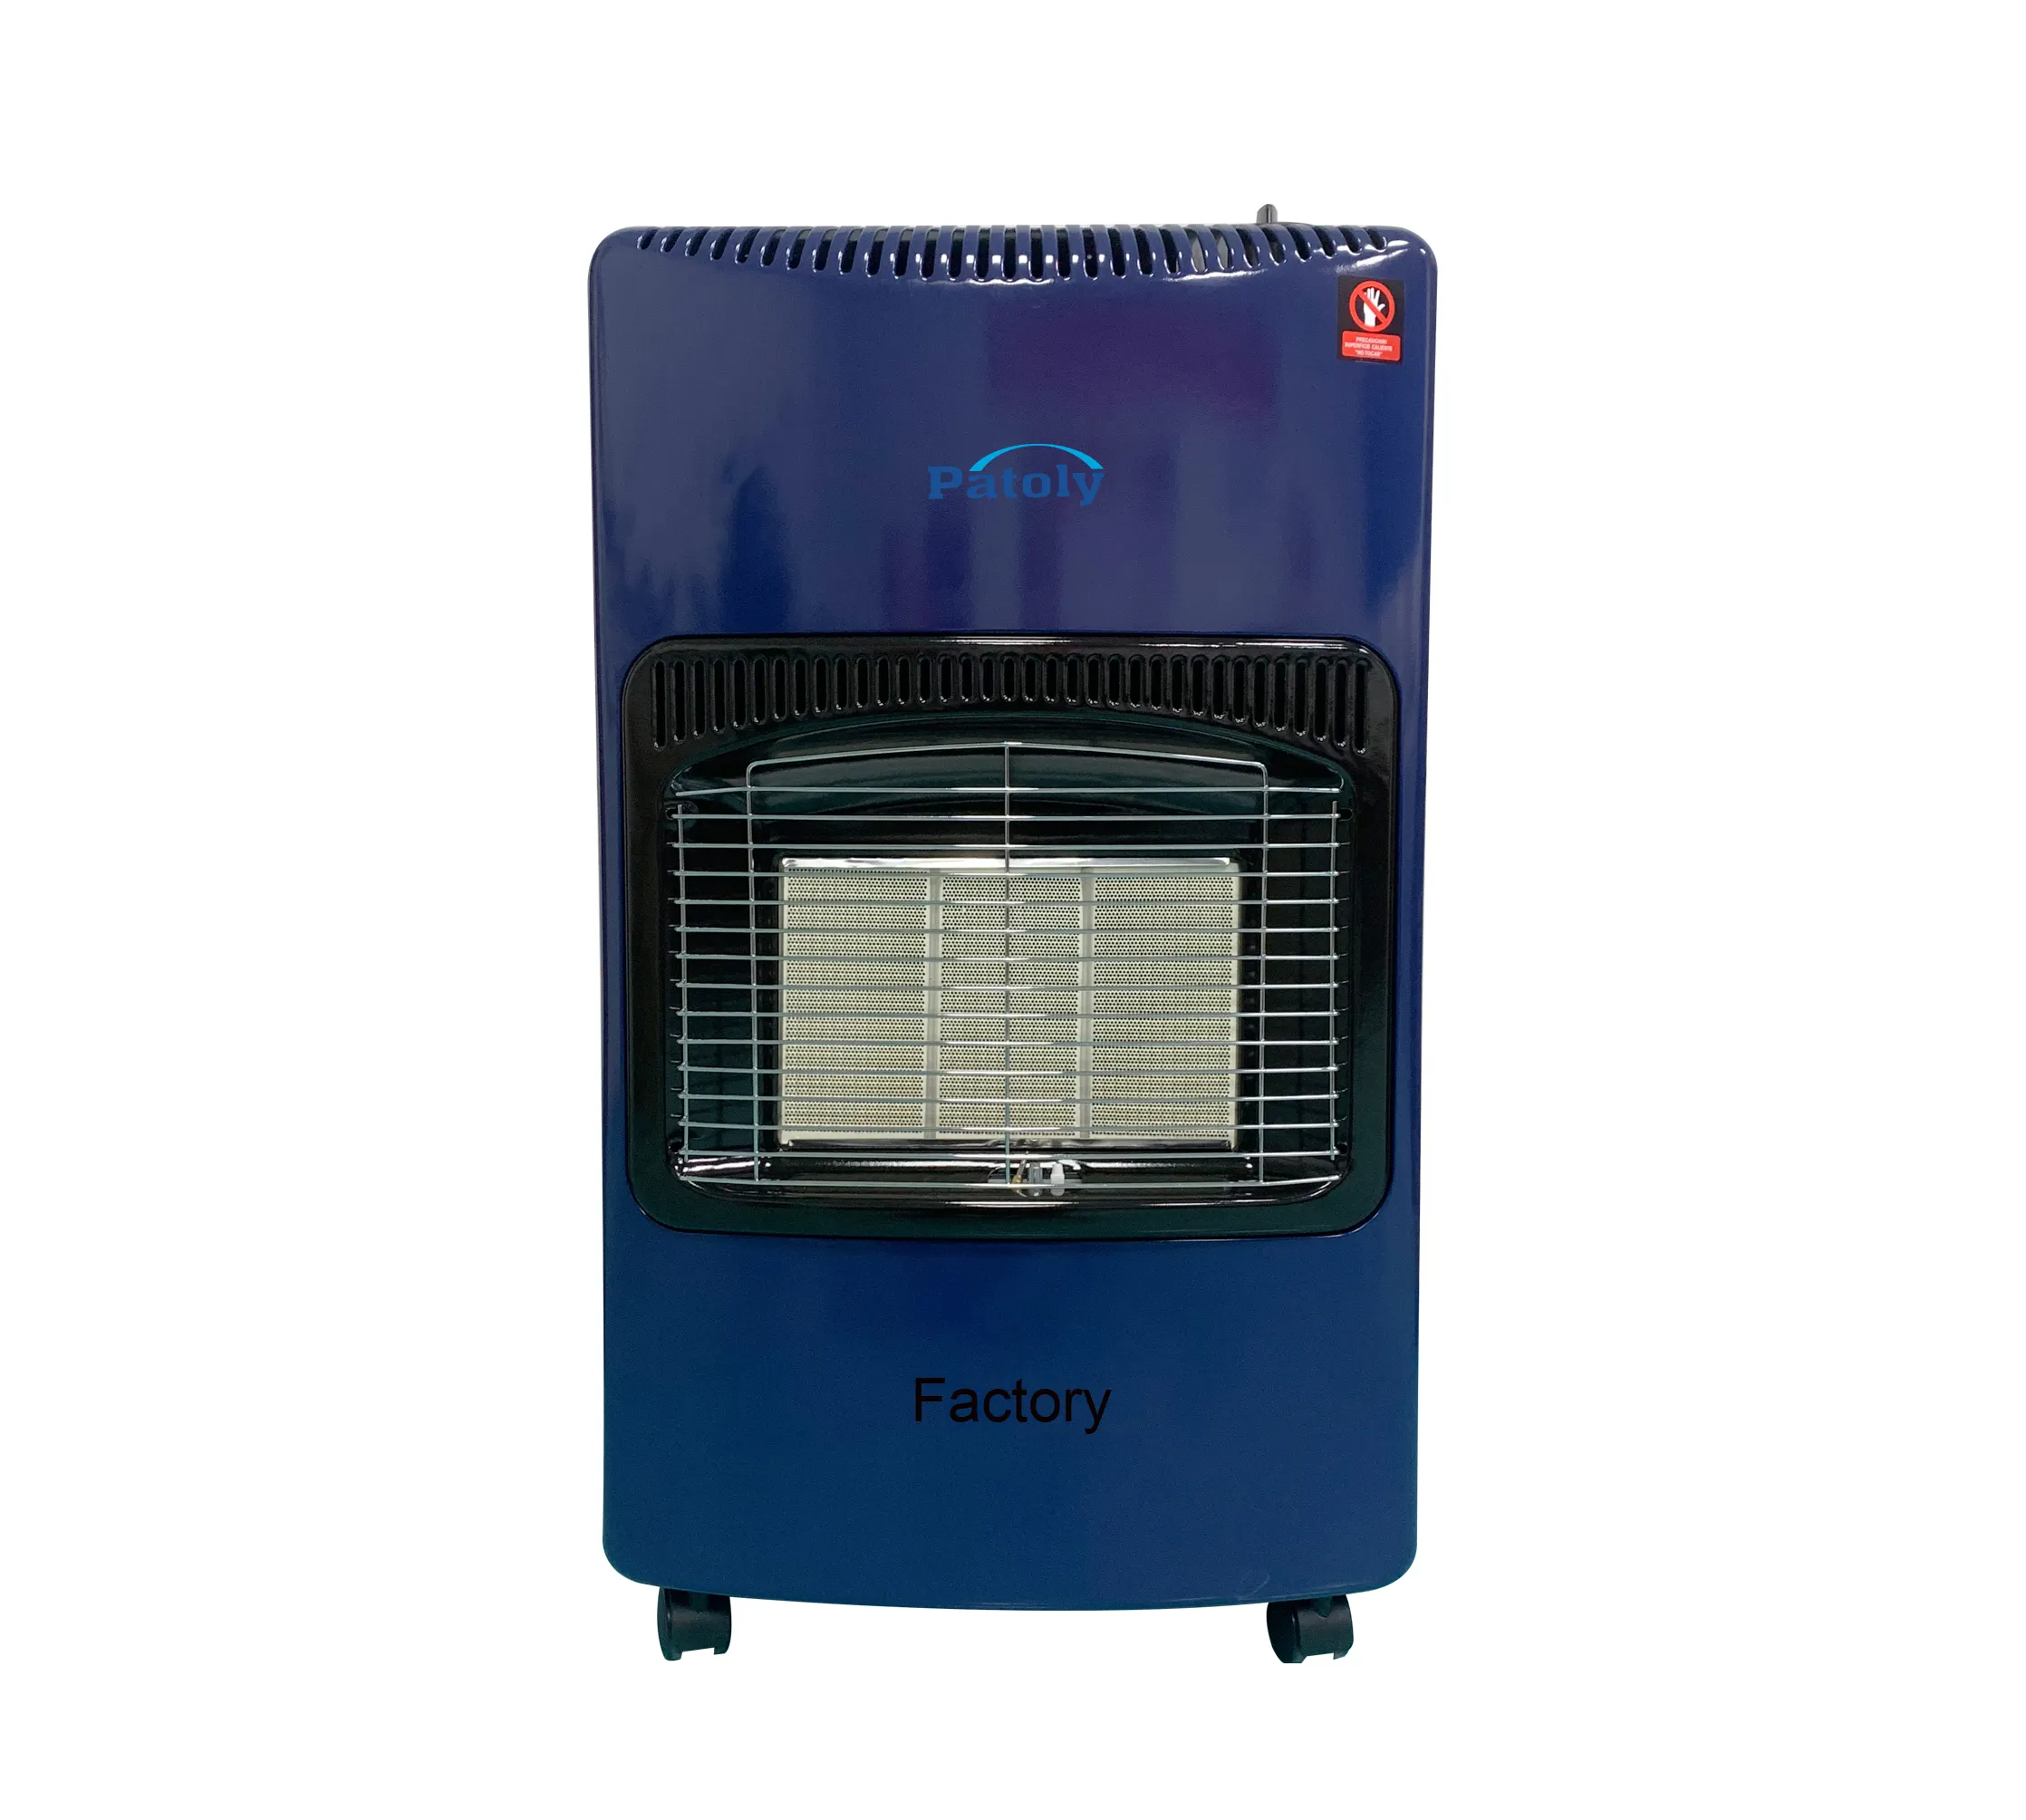 High quality LPG Gas electric heater indoor portable Folder living gas room heater for home infrared mobile natural gas heater